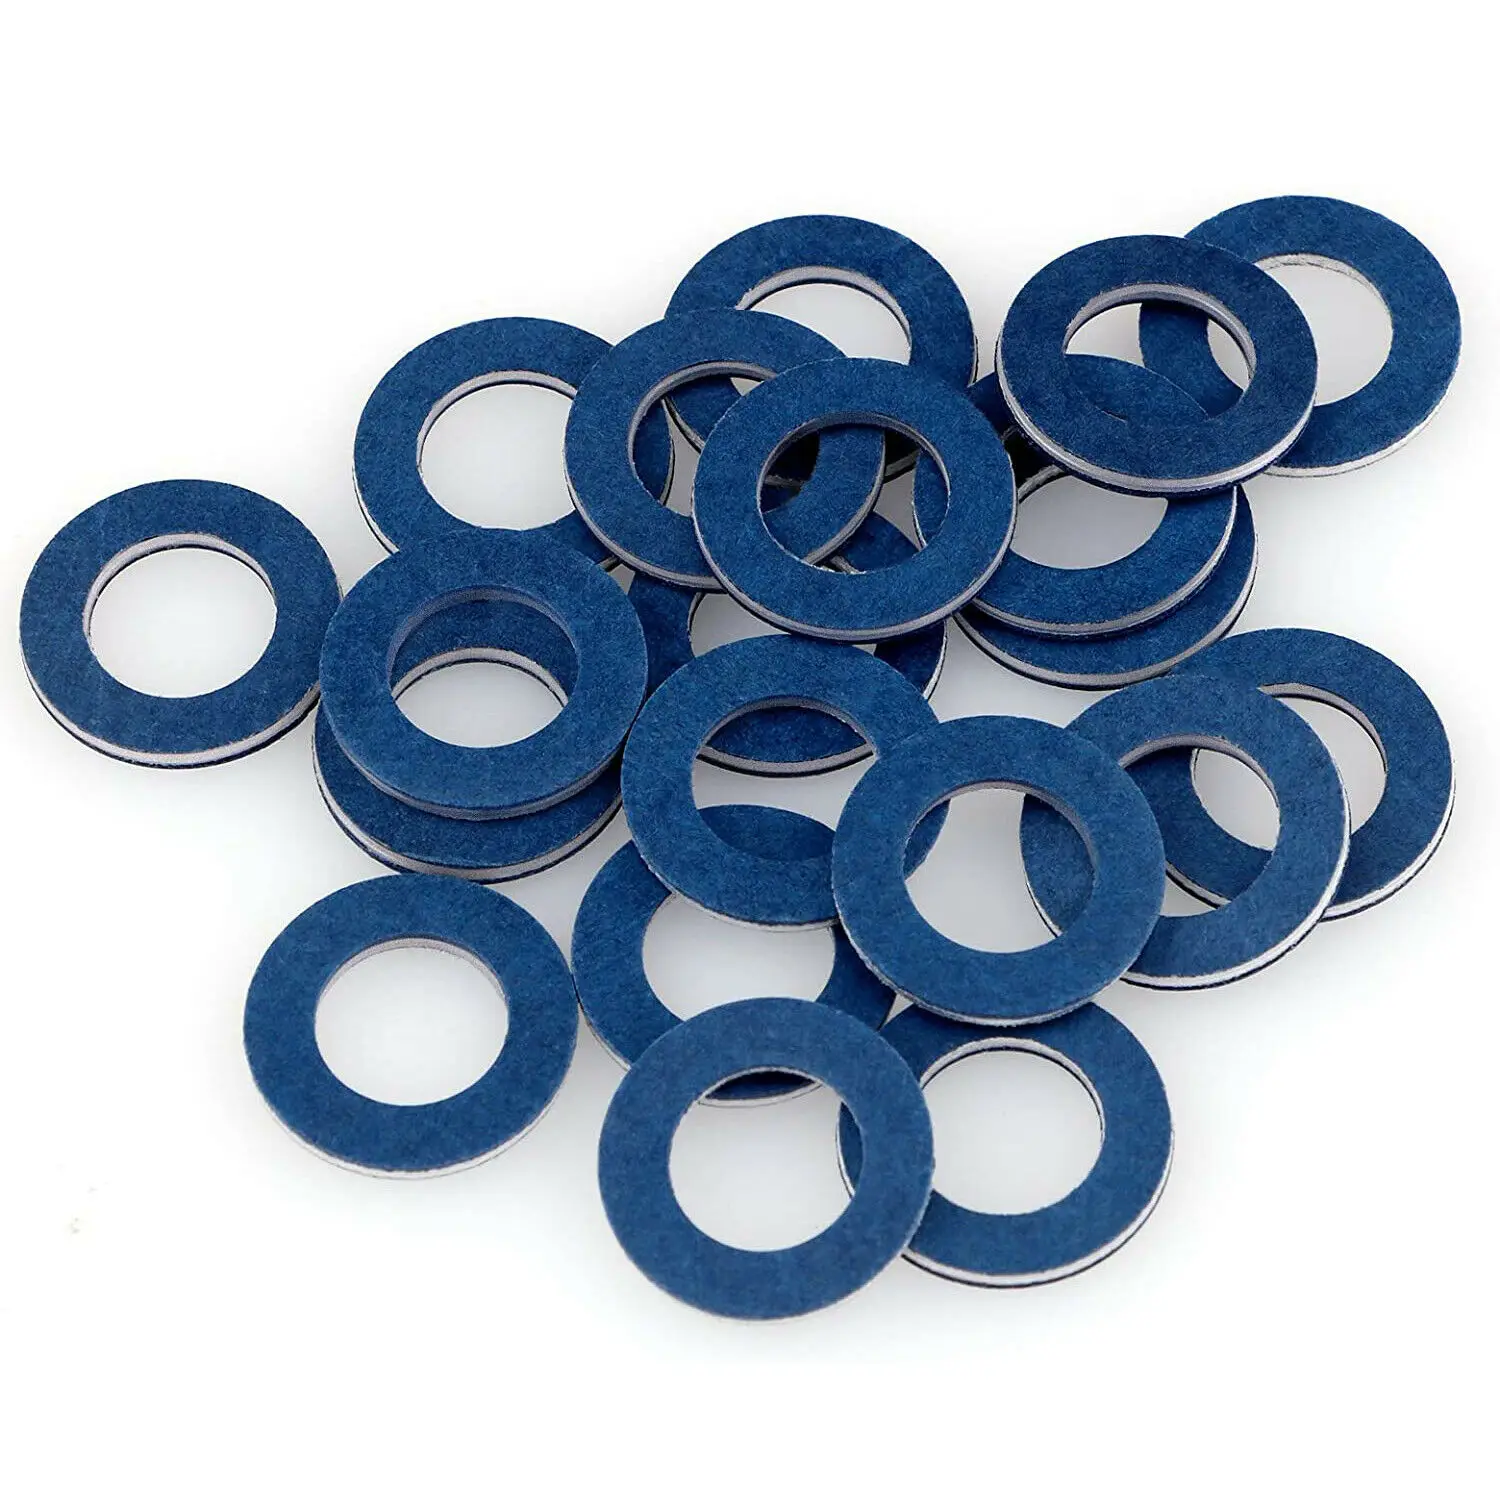 Baugger 10Pcs Oil Drain Plug Washers Car Engine Oil Pan Gaskets Replacement for Camry Lexus Corolla 90430-12031